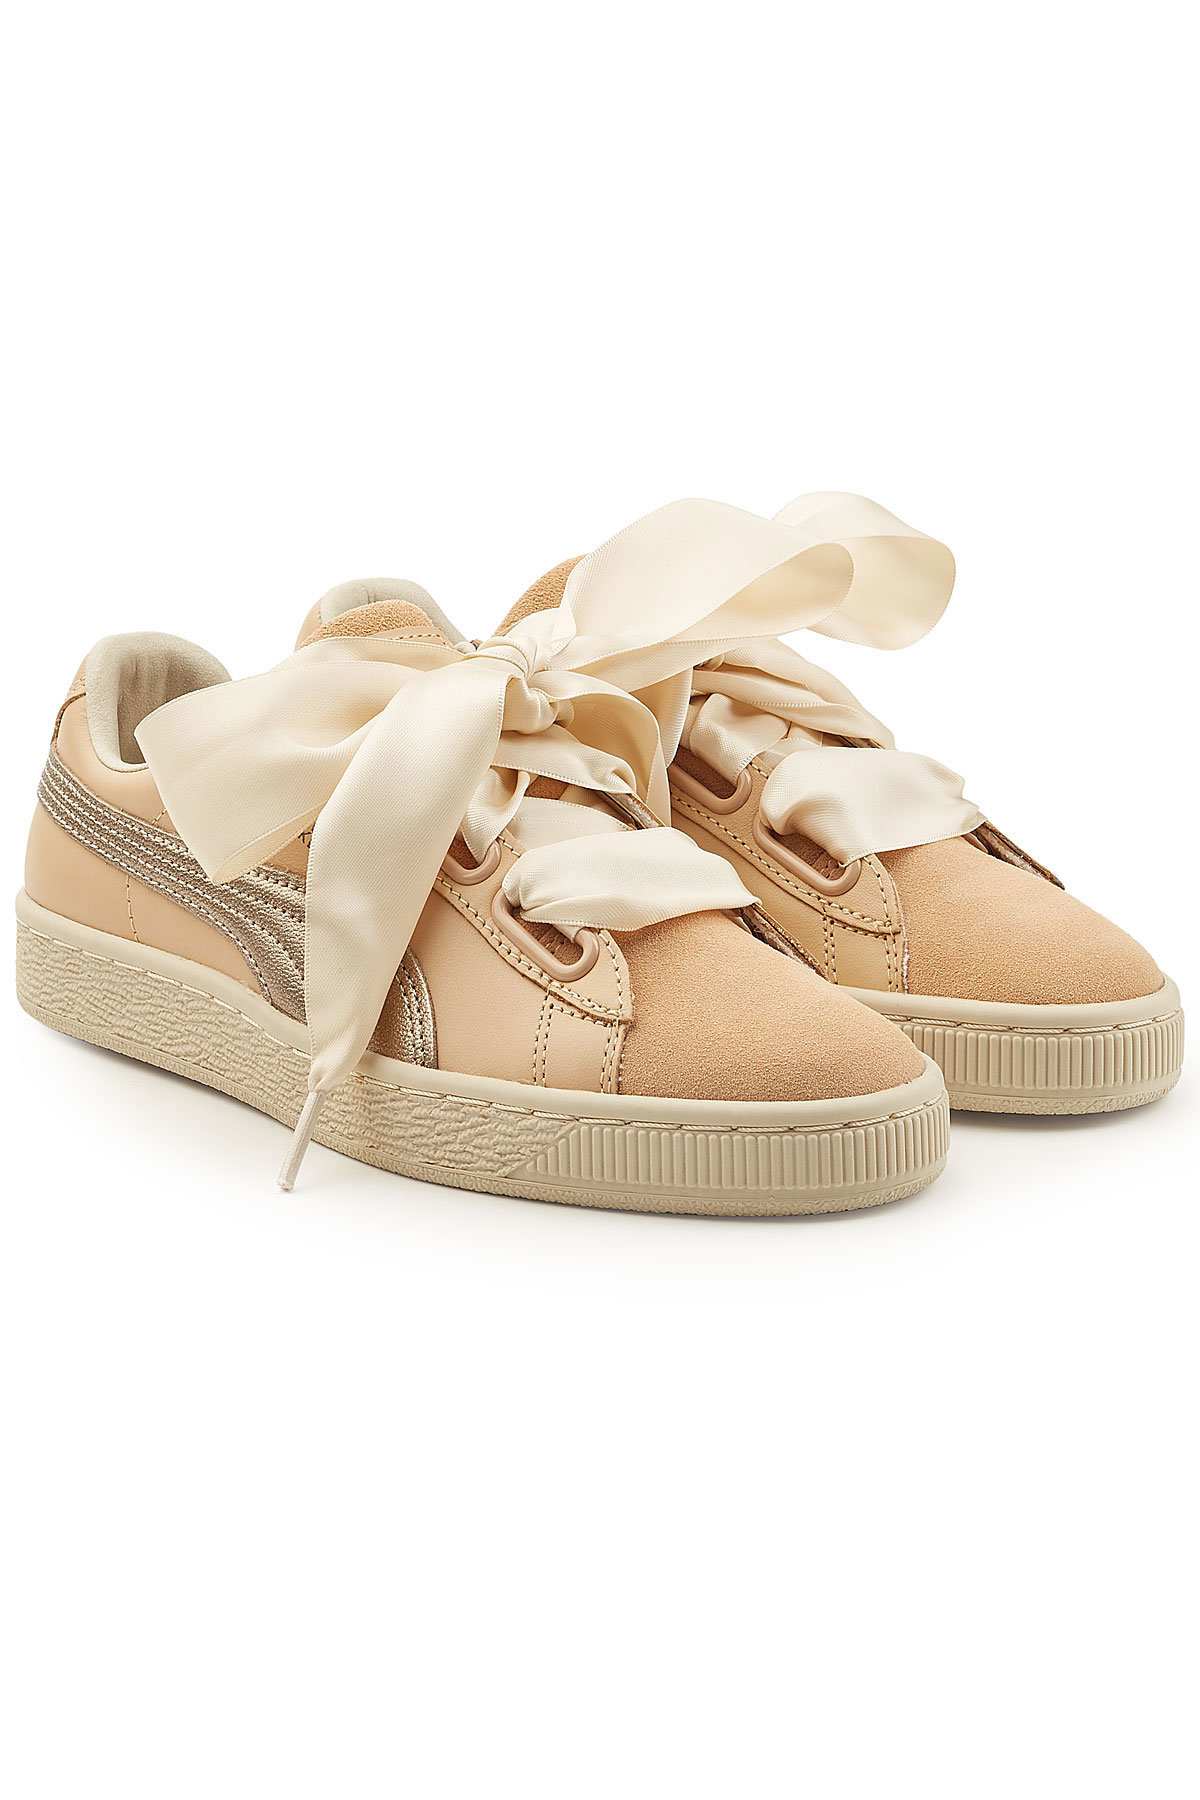 Puma - Basket Heart Suede and Leather Sneakers